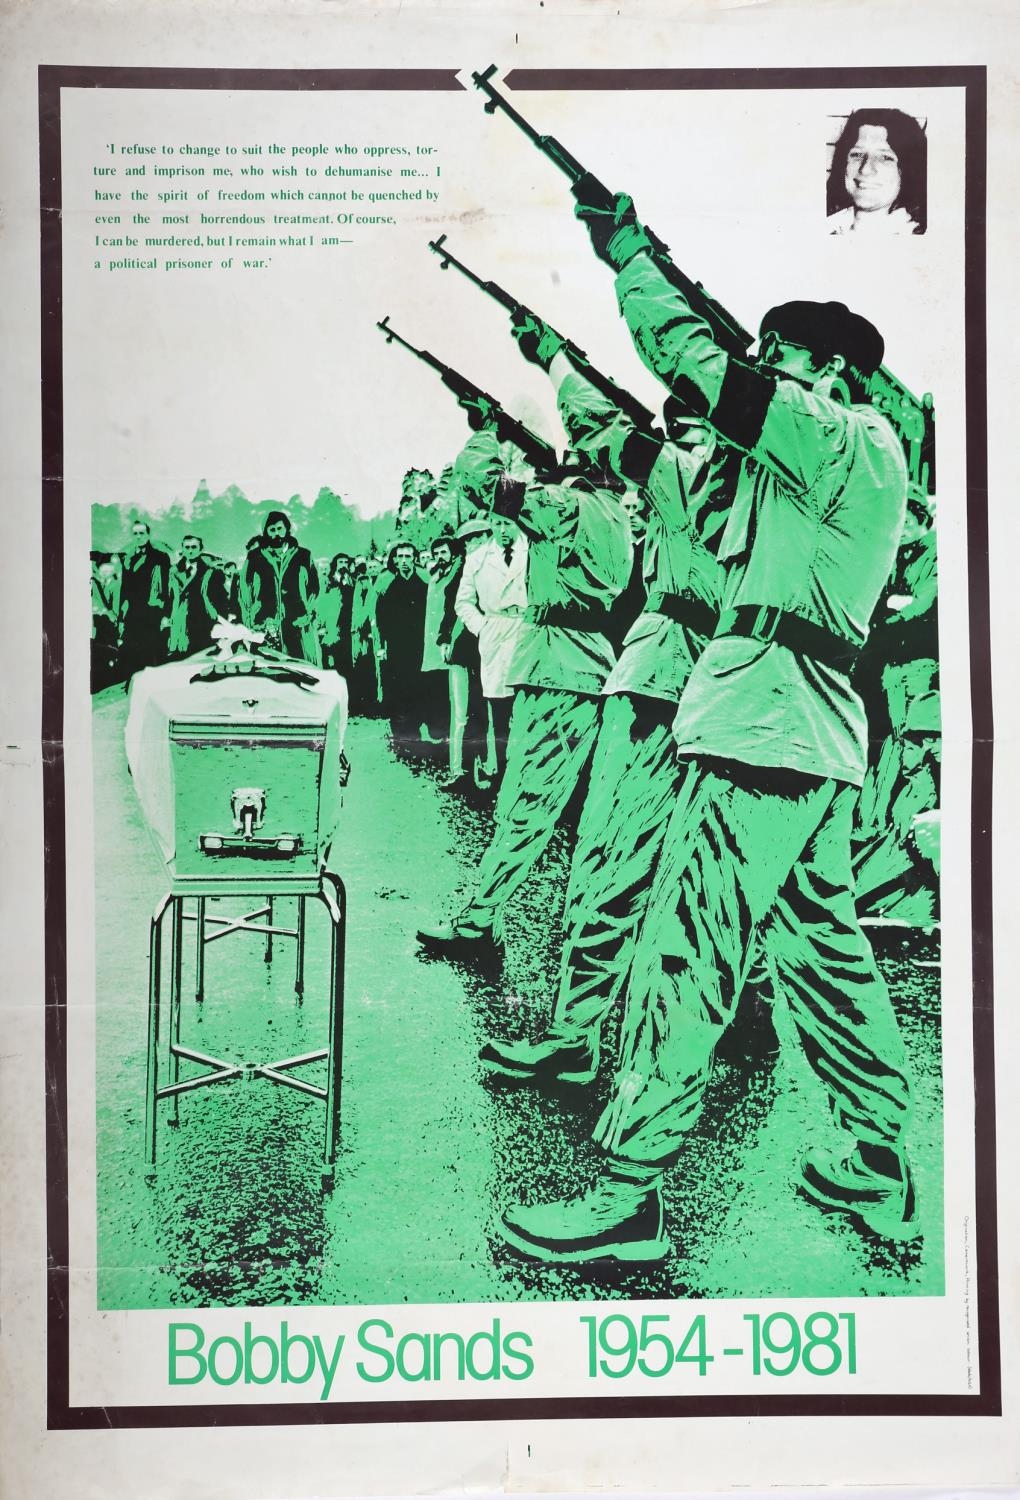 1981 Hunger Strike, commemorative posters. Three posters seeking support for and commemorating the